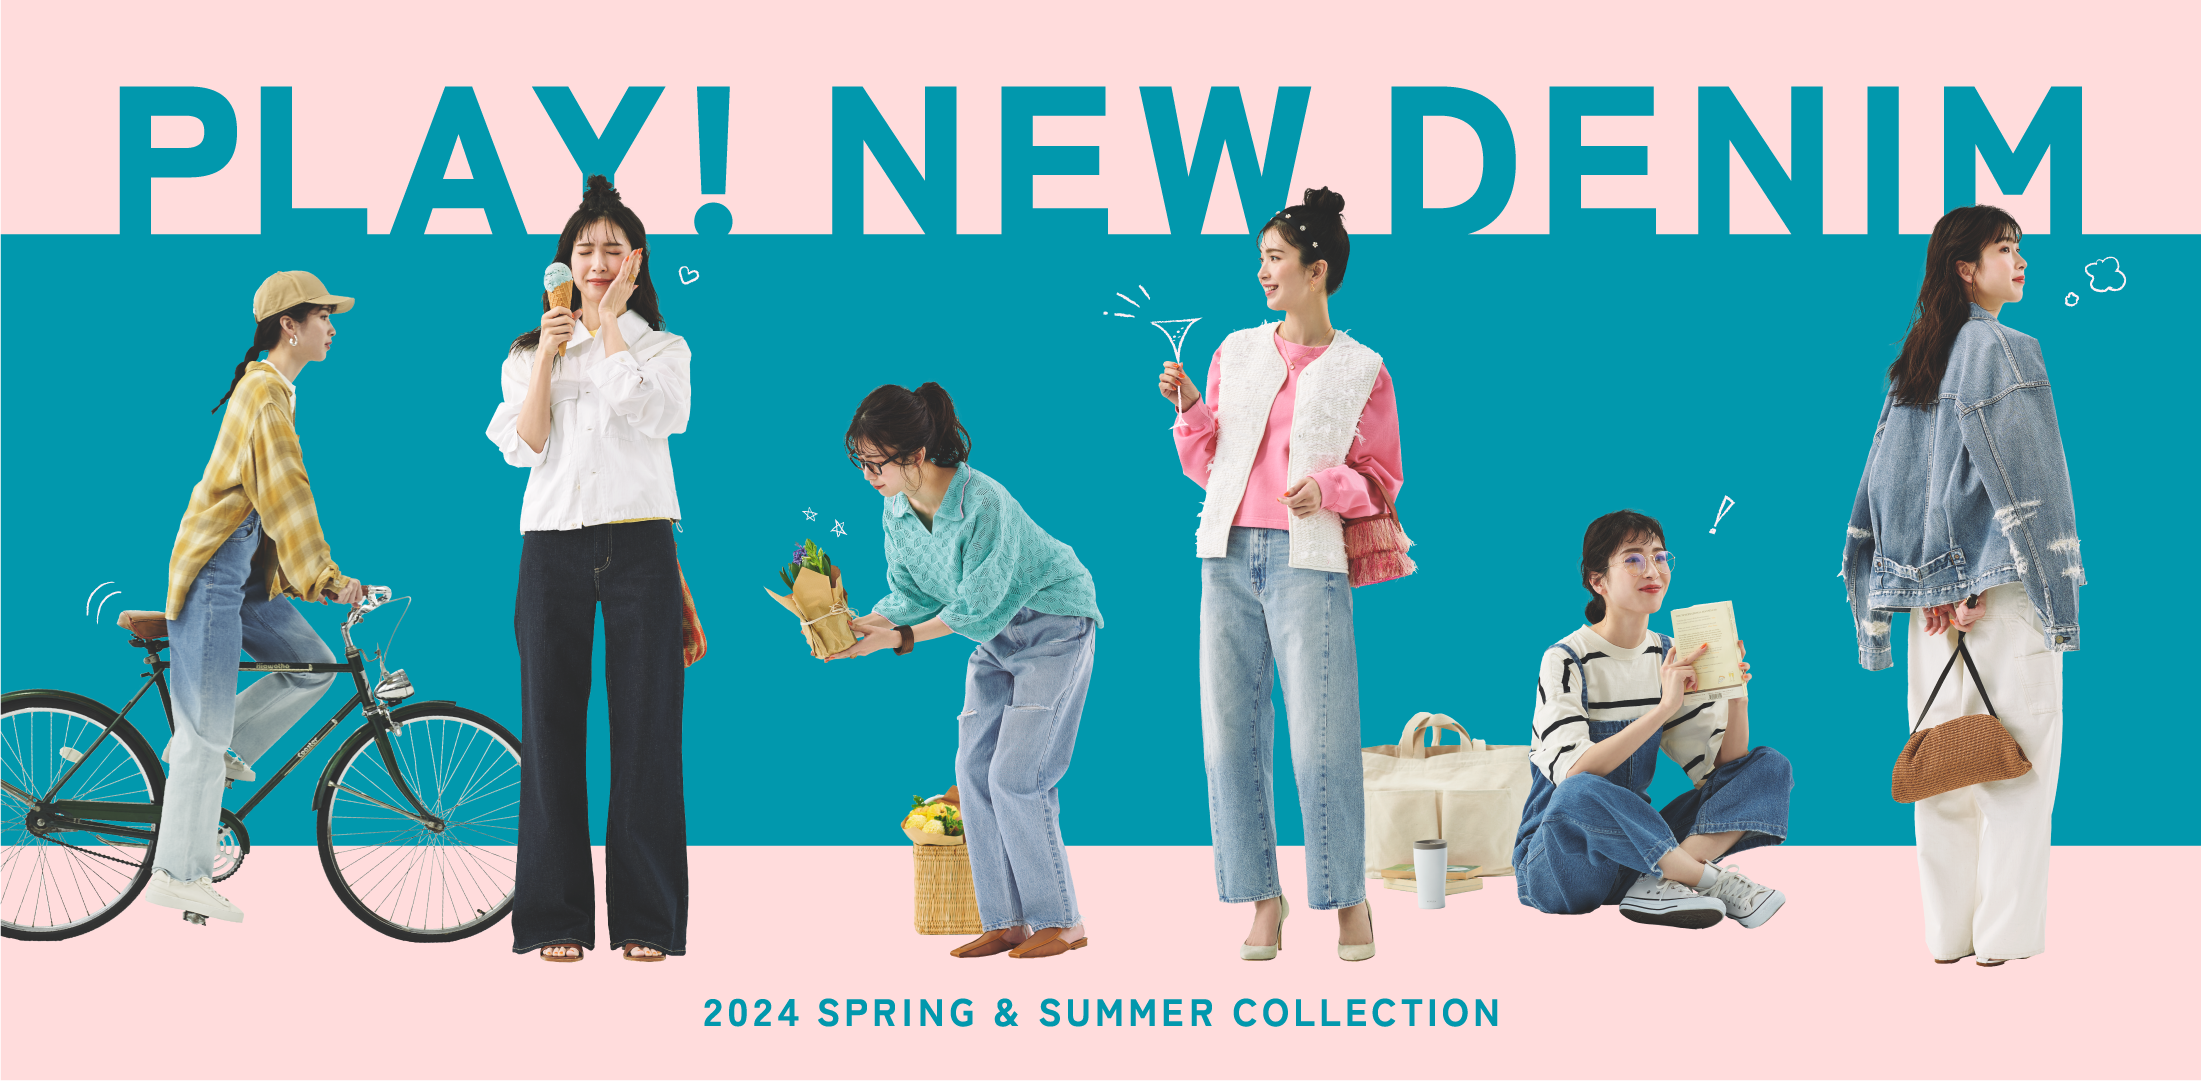 PLAY! NEW DENIM 2024 SPRING & SUMMER COLLECTION